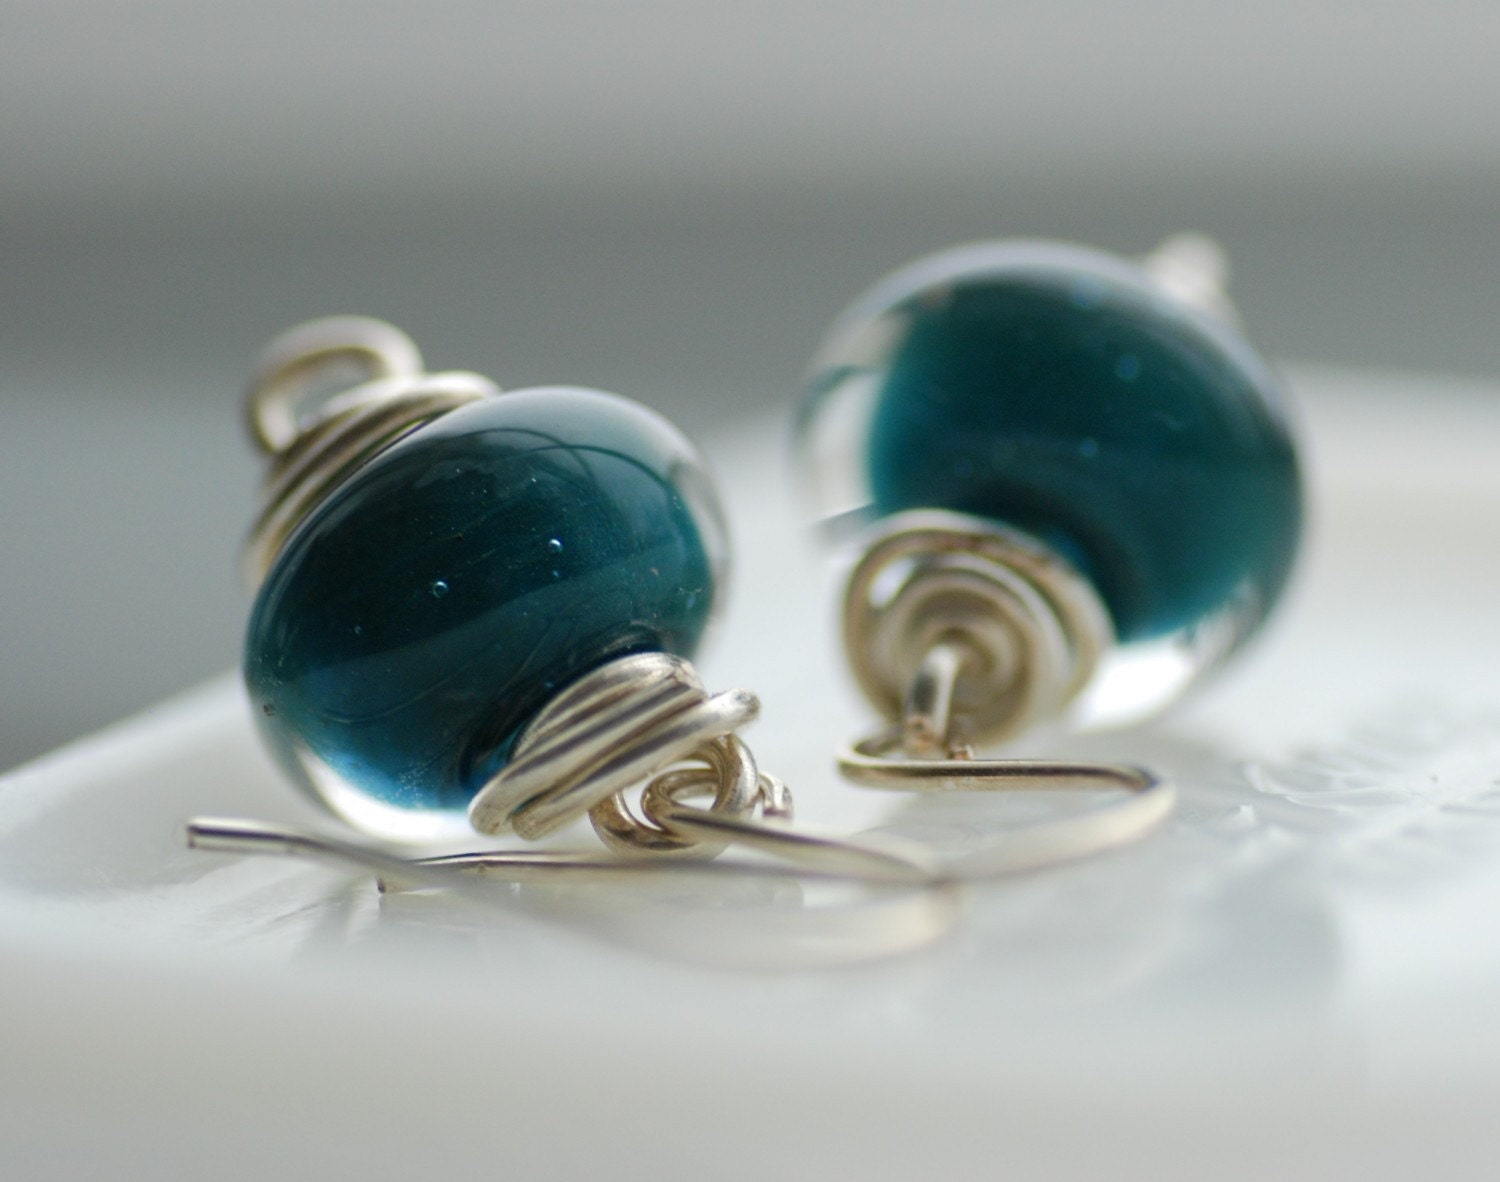 Earrings,  Turquoise Teal Boro Glass and Sterling Silver - One of a Kind - Caribbean